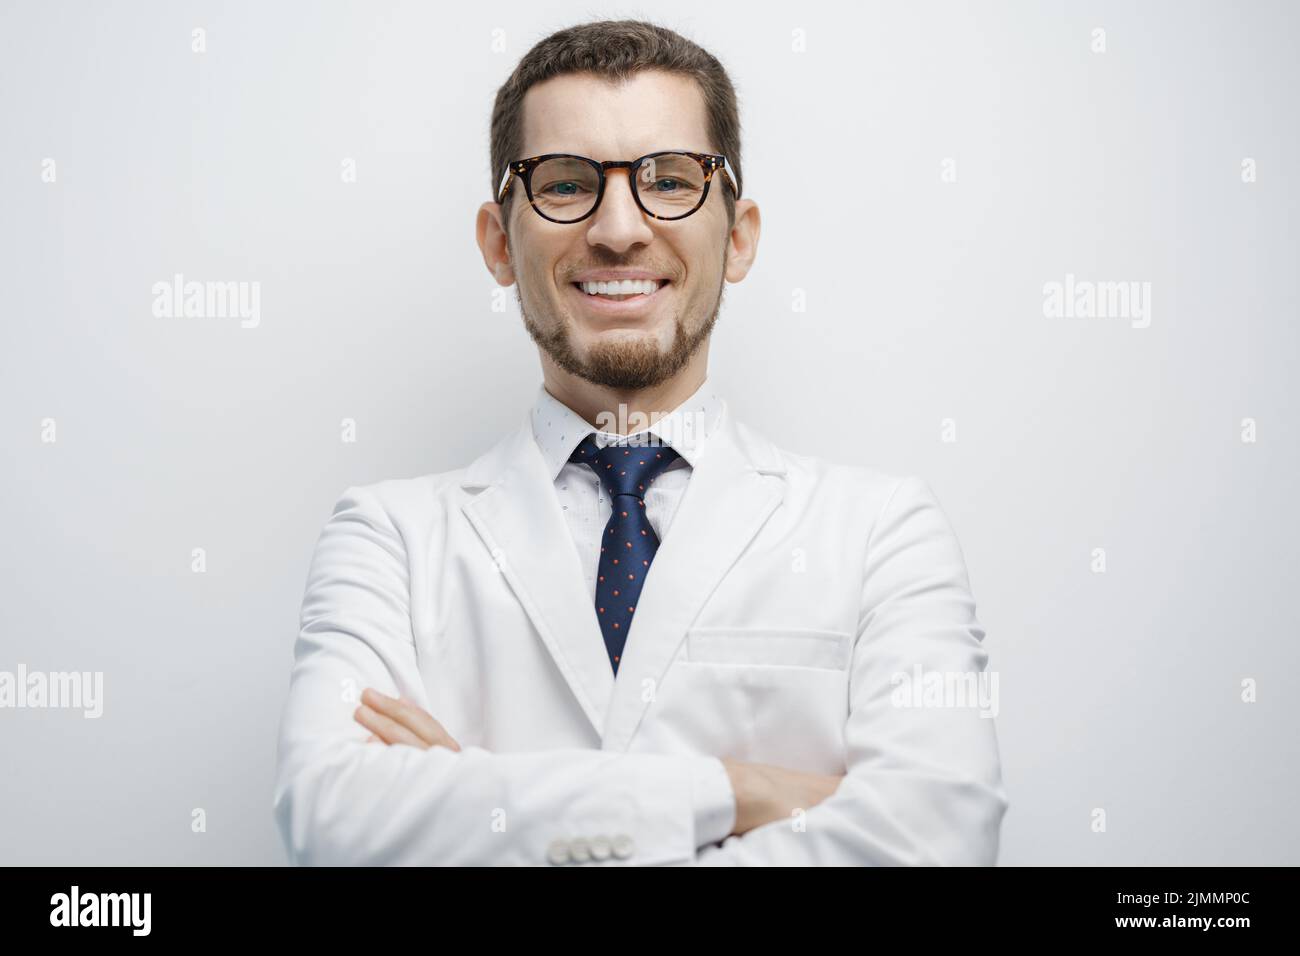 Portrait of male doctor smiling isolated on white background Stock Photo